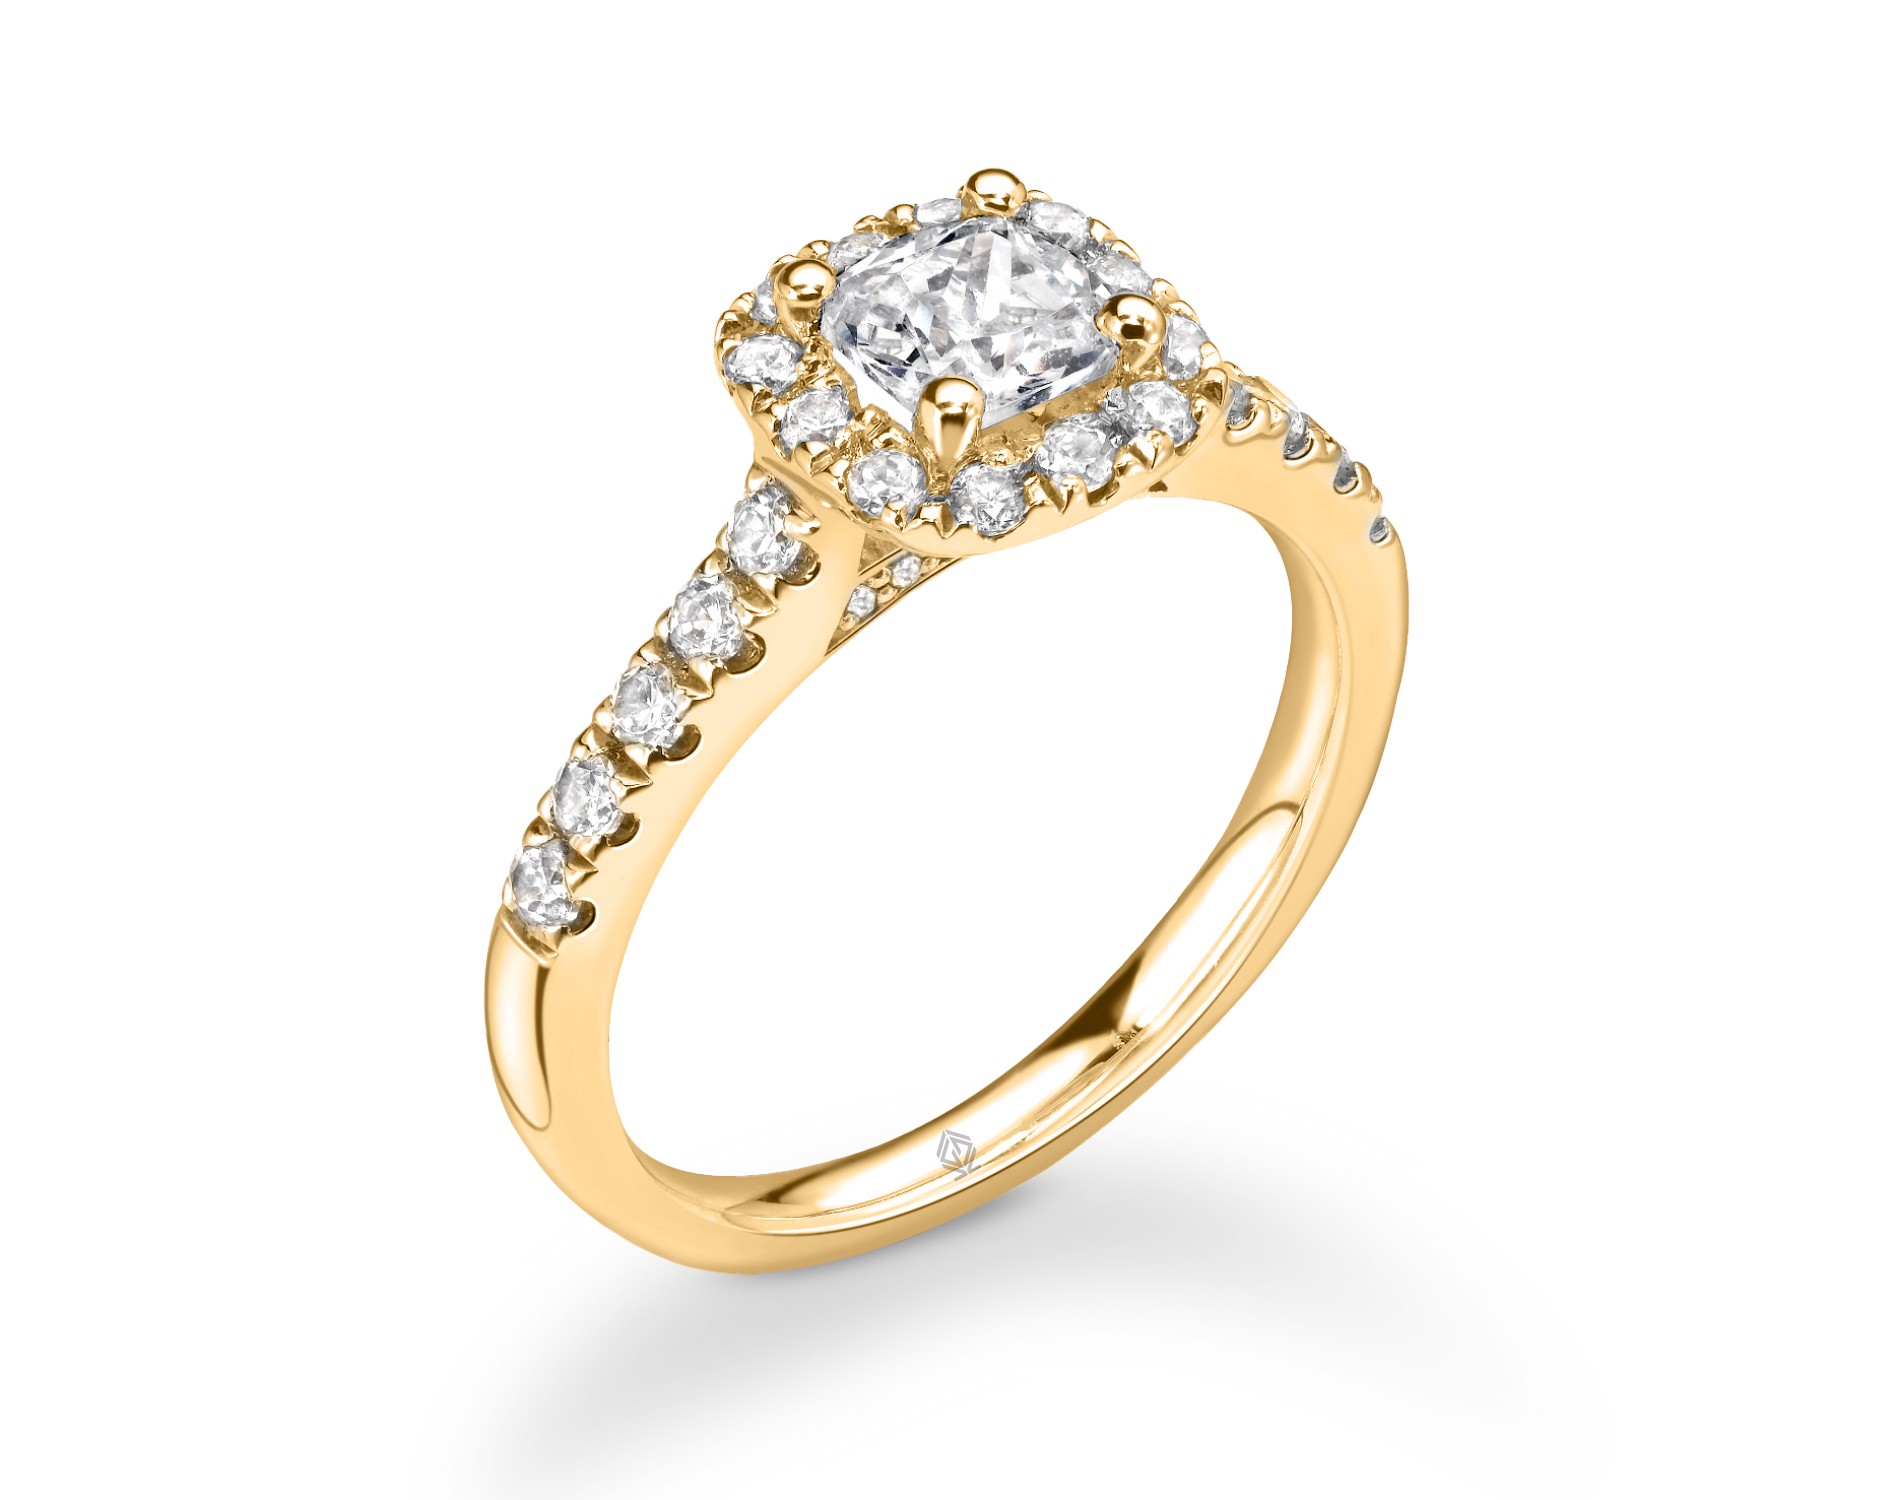 18K YELLOW GOLD HALO CUSHION CUT DIAMOND ENGAGEMENT RING WITH SIDE STONES PAVE SET